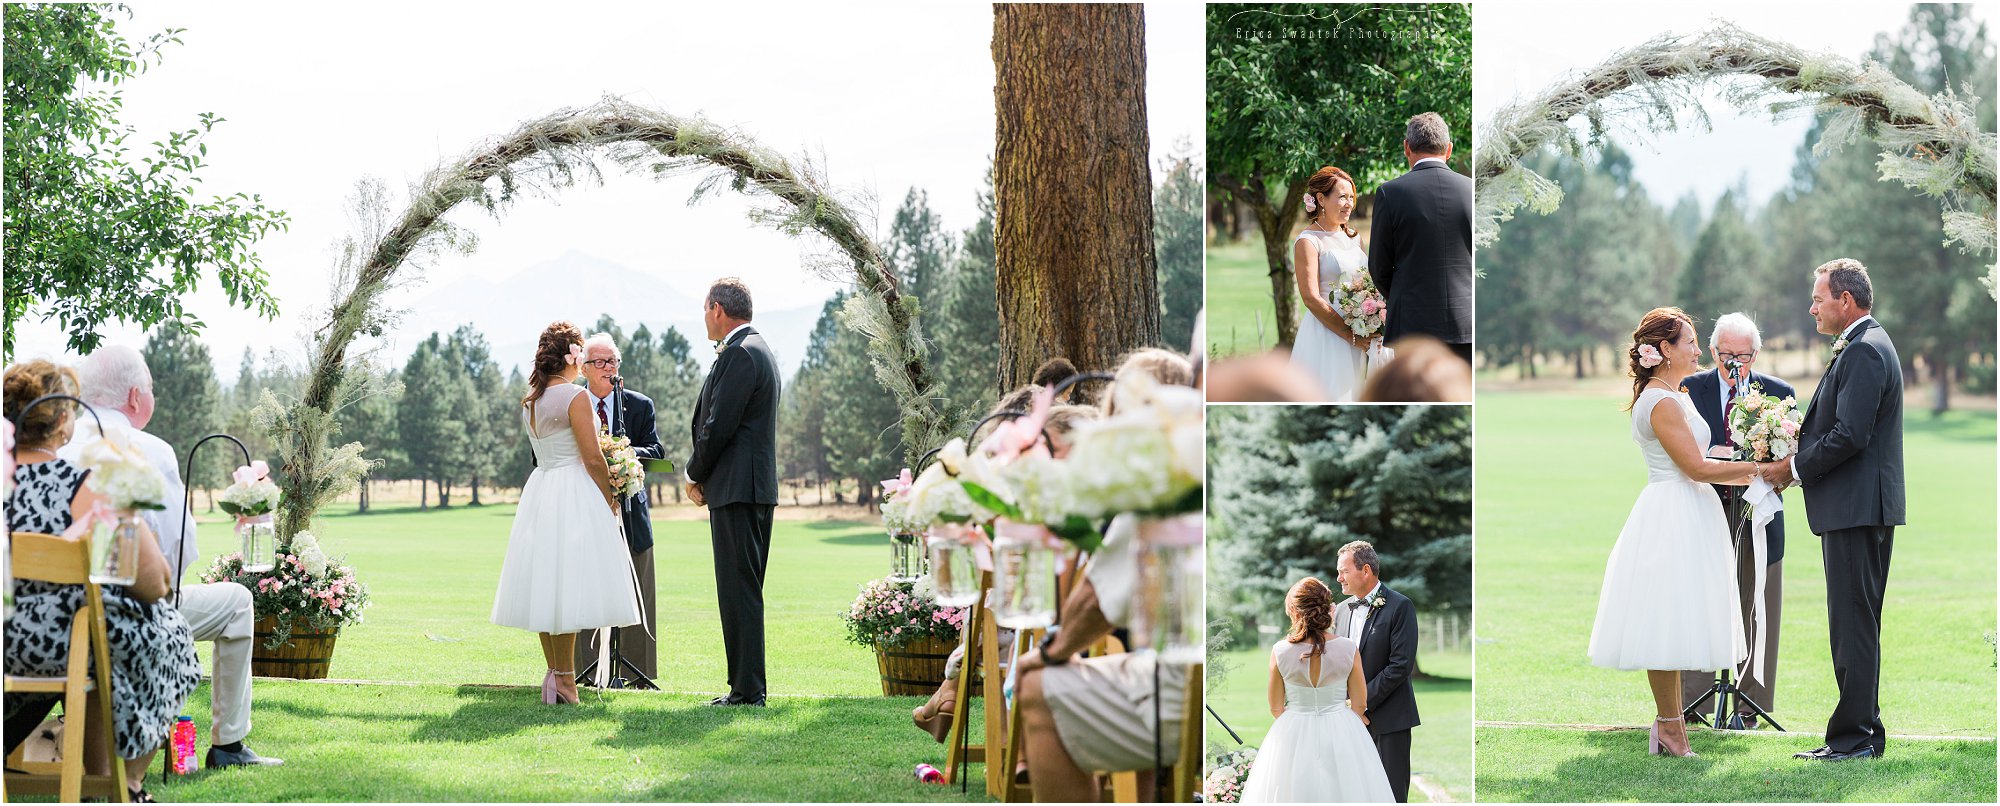 A beautiful mountain view through the arch arbor at this outdoor garden wedding ceremony in Sisters, OR by Bend wedding photographer Erica Swantek Photography. 